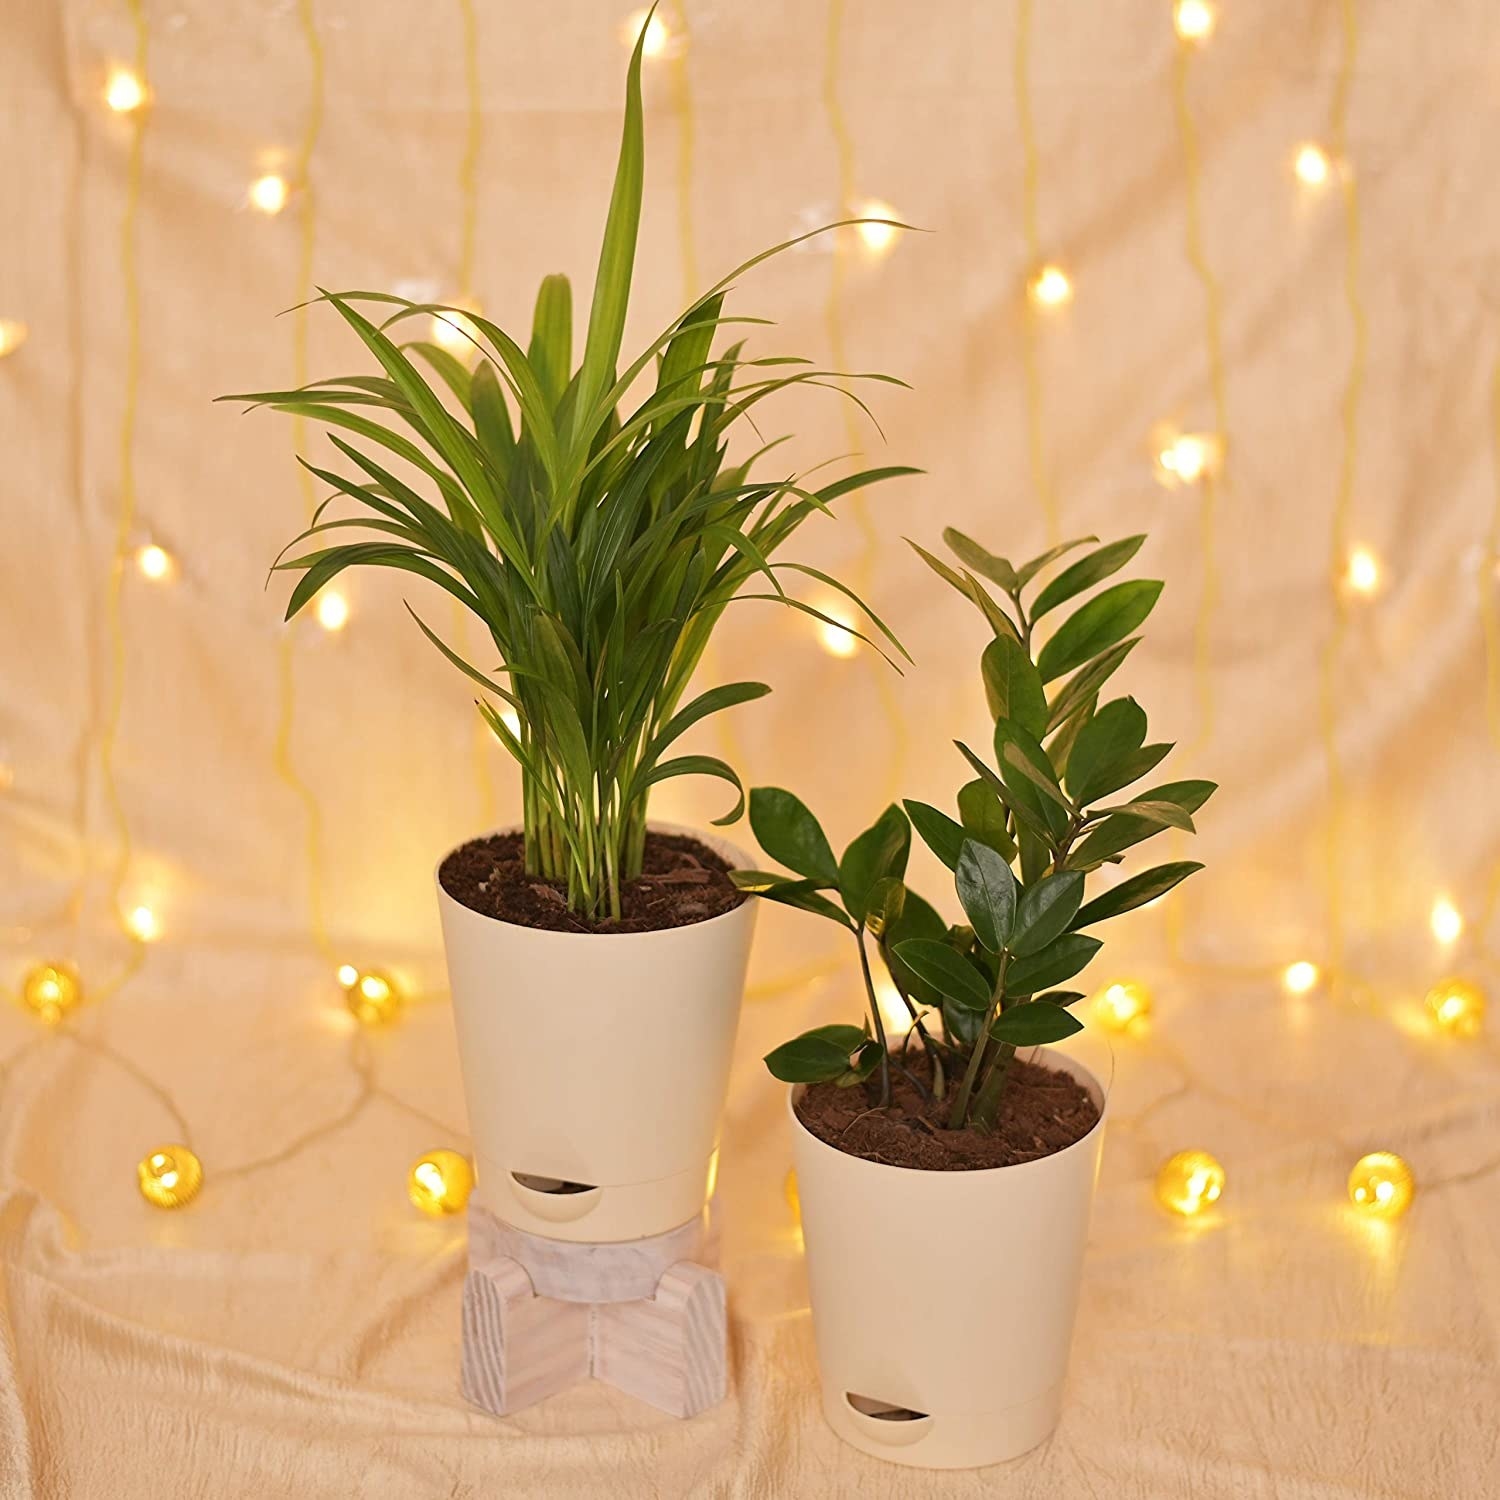 Two plants on a table next to some starry lights 